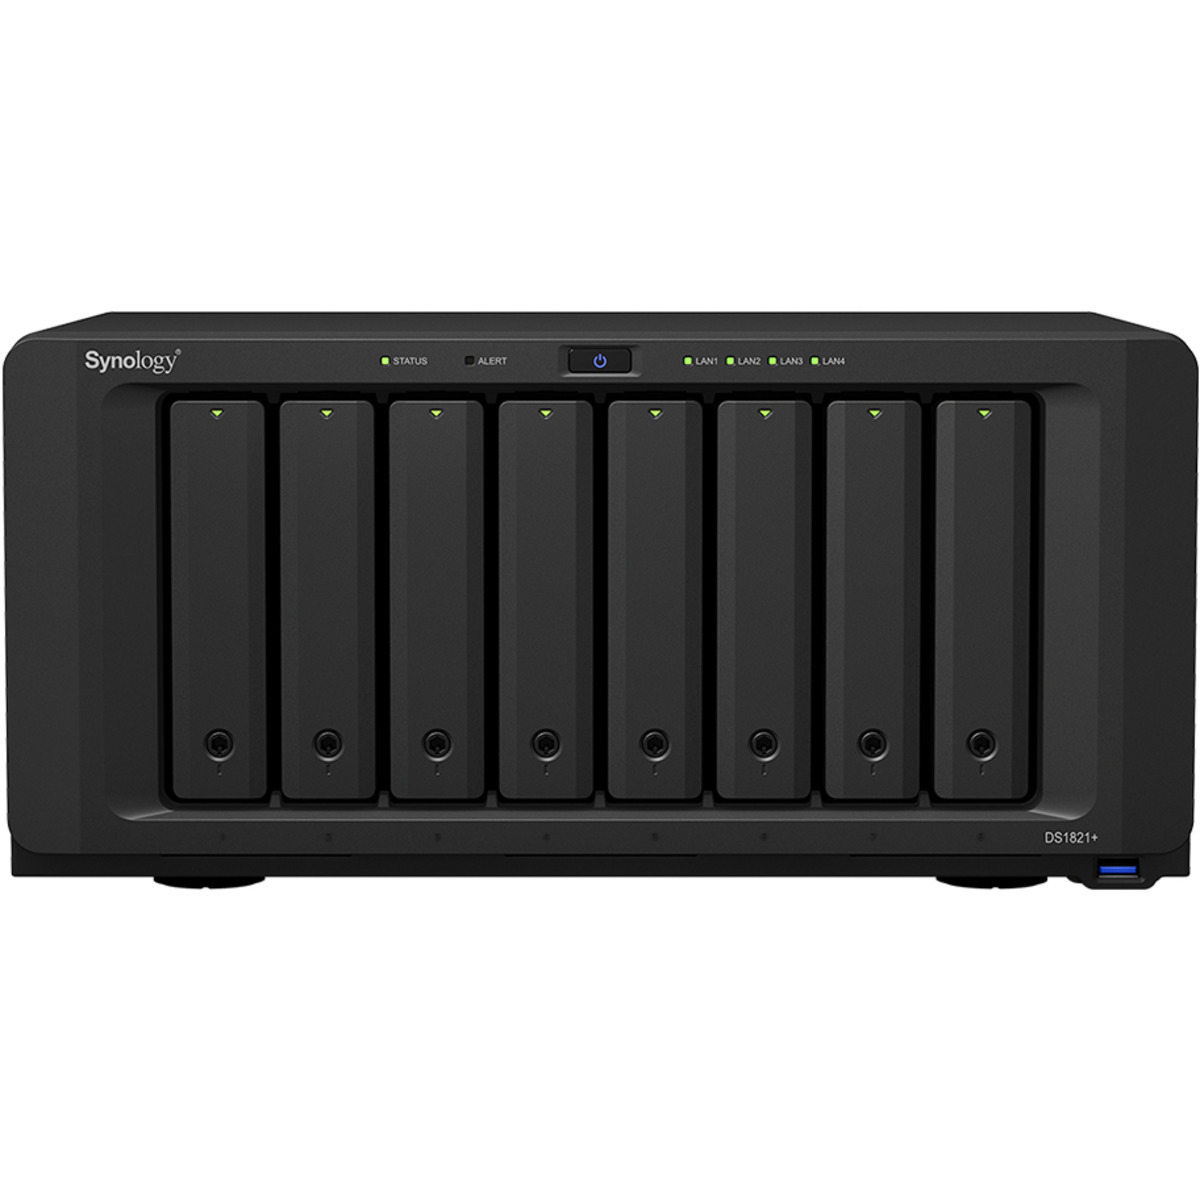 Synology DiskStation DS1821+ 16tb 8-Bay Desktop Multimedia / Power User / Business NAS - Network Attached Storage Device 8x2tb Samsung 870 QVO MZ-77Q2T0 2.5 560/530MB/s SATA 6Gb/s SSD CONSUMER Class Drives Installed - Burn-In Tested - FREE RAM UPGRADE DiskStation DS1821+